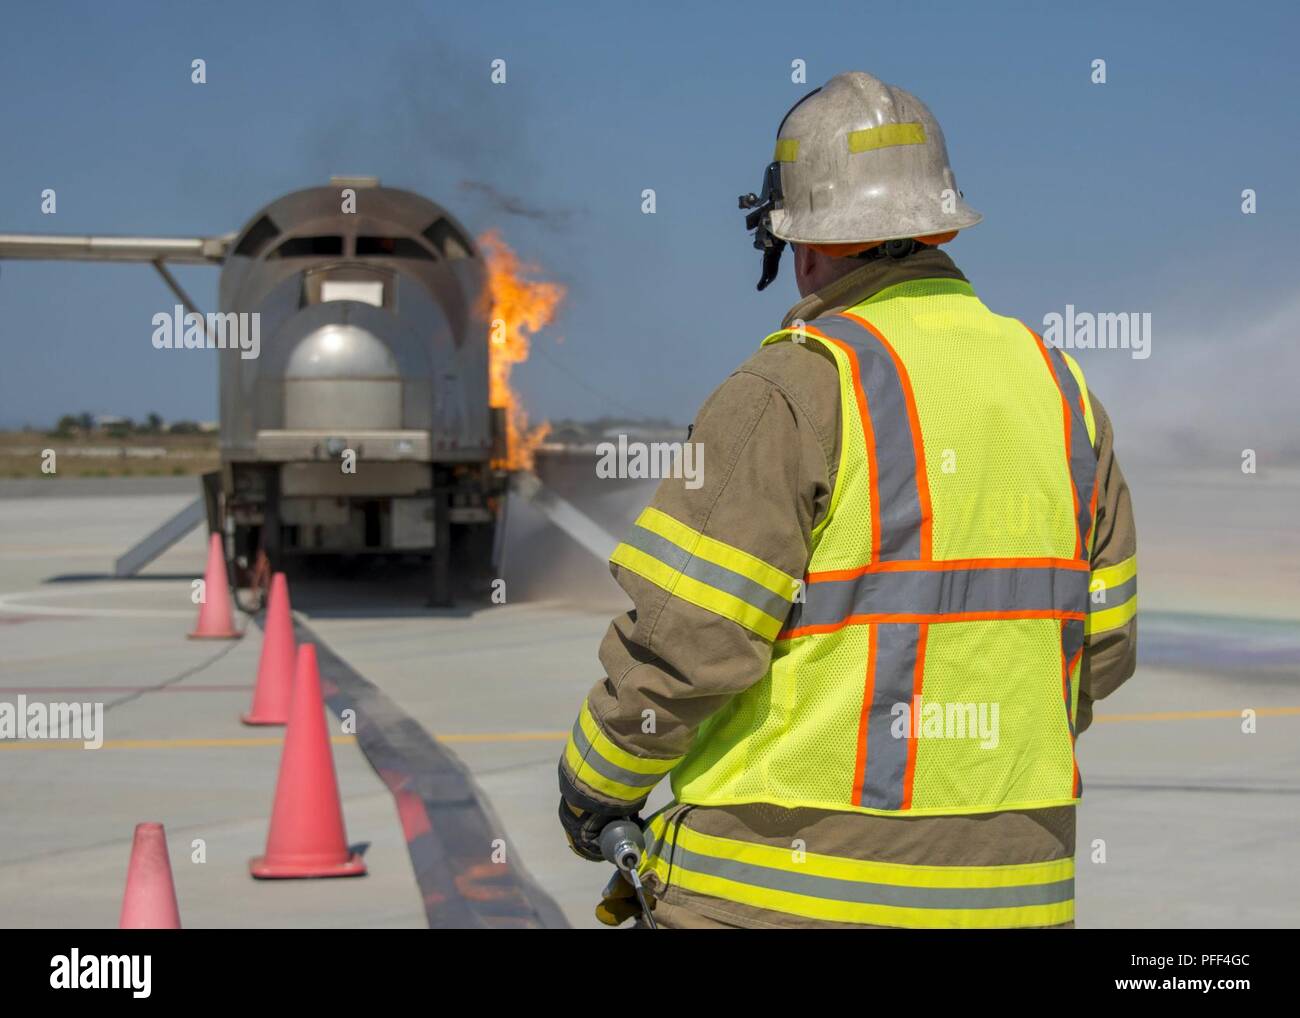 NAVAL SUPPORT ACTIVITY SOUDA BAY, Greece (June 13, 2018) Patrick Murphy, Assistant Fire Chief, Naval Support Activity (NSA) Souda Bay, Greece, ignites a fire on a Mobile Aircraft Fire Trainer Device (MAFTD) during a simulated emergency landing exercise, June 13, 2018, at NSA Souda Bay. NSA Souda Bay recently participated in various scenarios that simulated command-level and tactical decision-making as part of an Operational Readiness Assessment evaluated by a Regional Training Team. Stock Photo